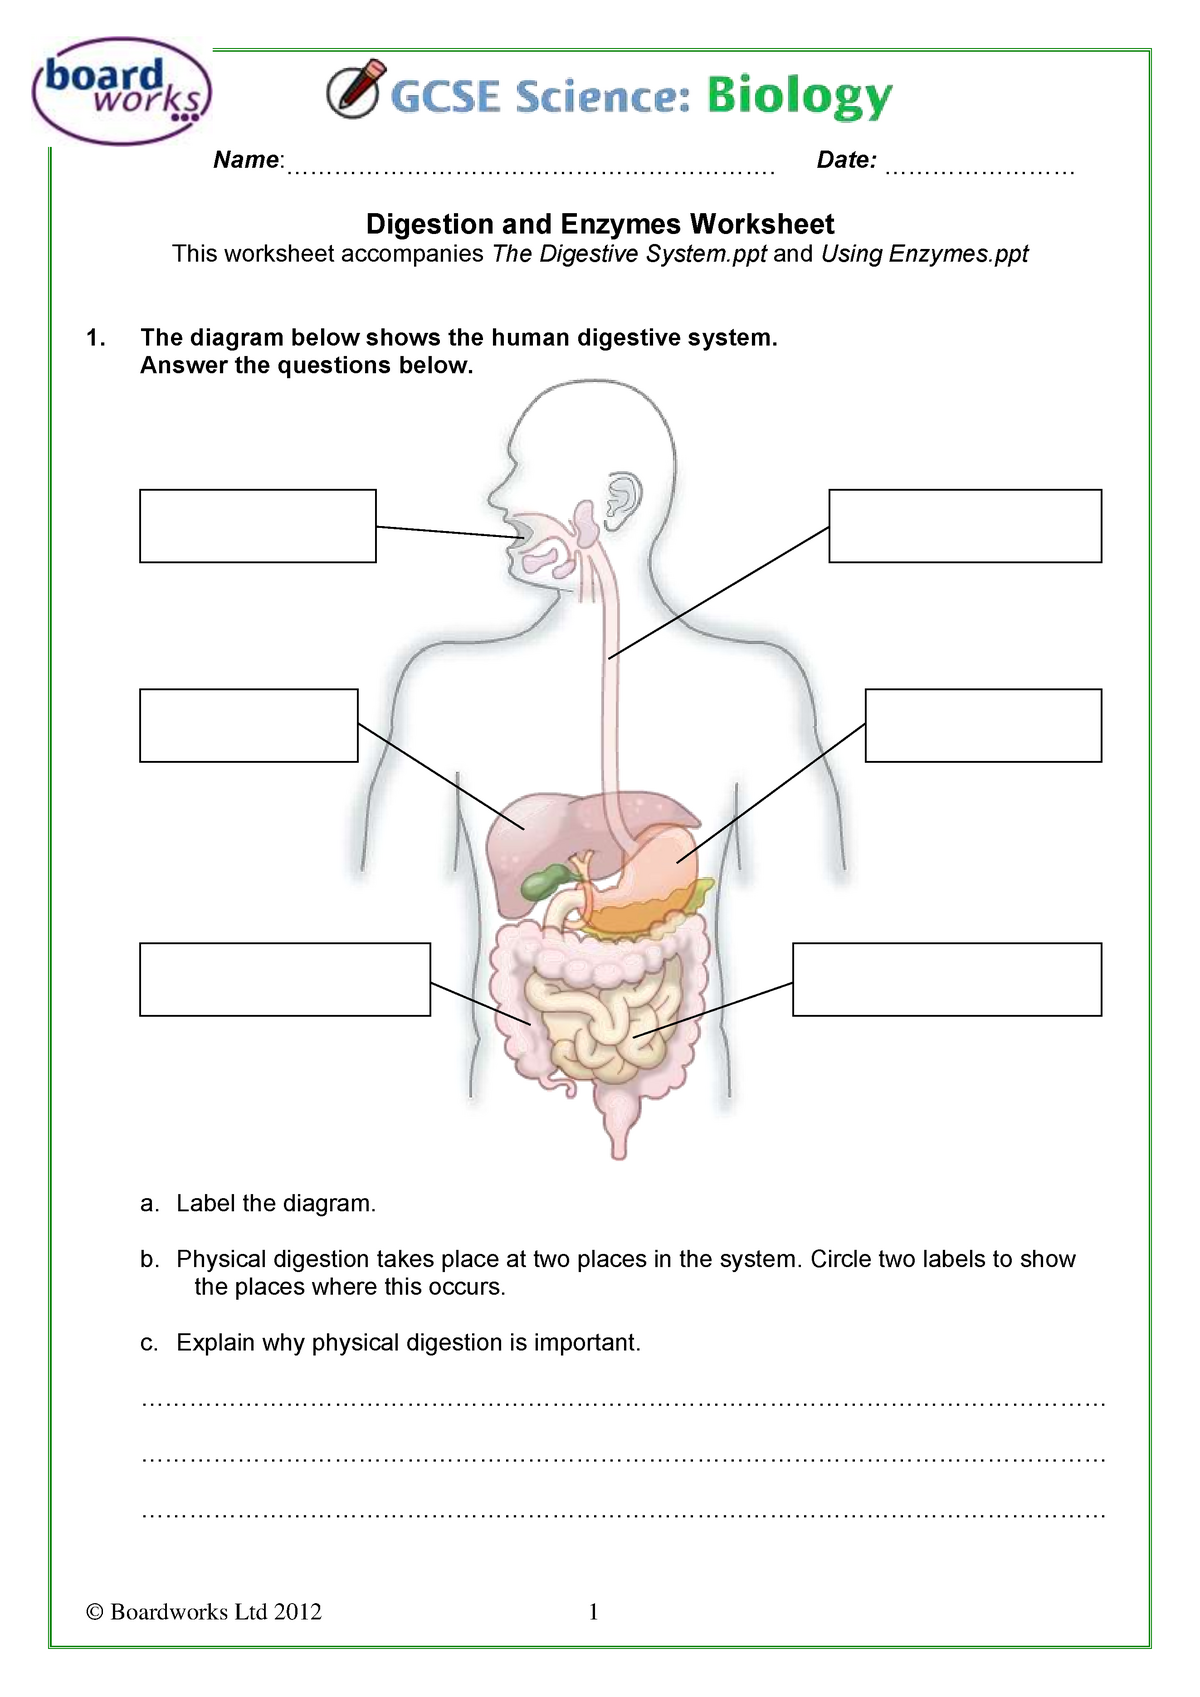 Digestion and Enzymes Worksheet - International Business - BADM Within Human Digestive System Worksheet